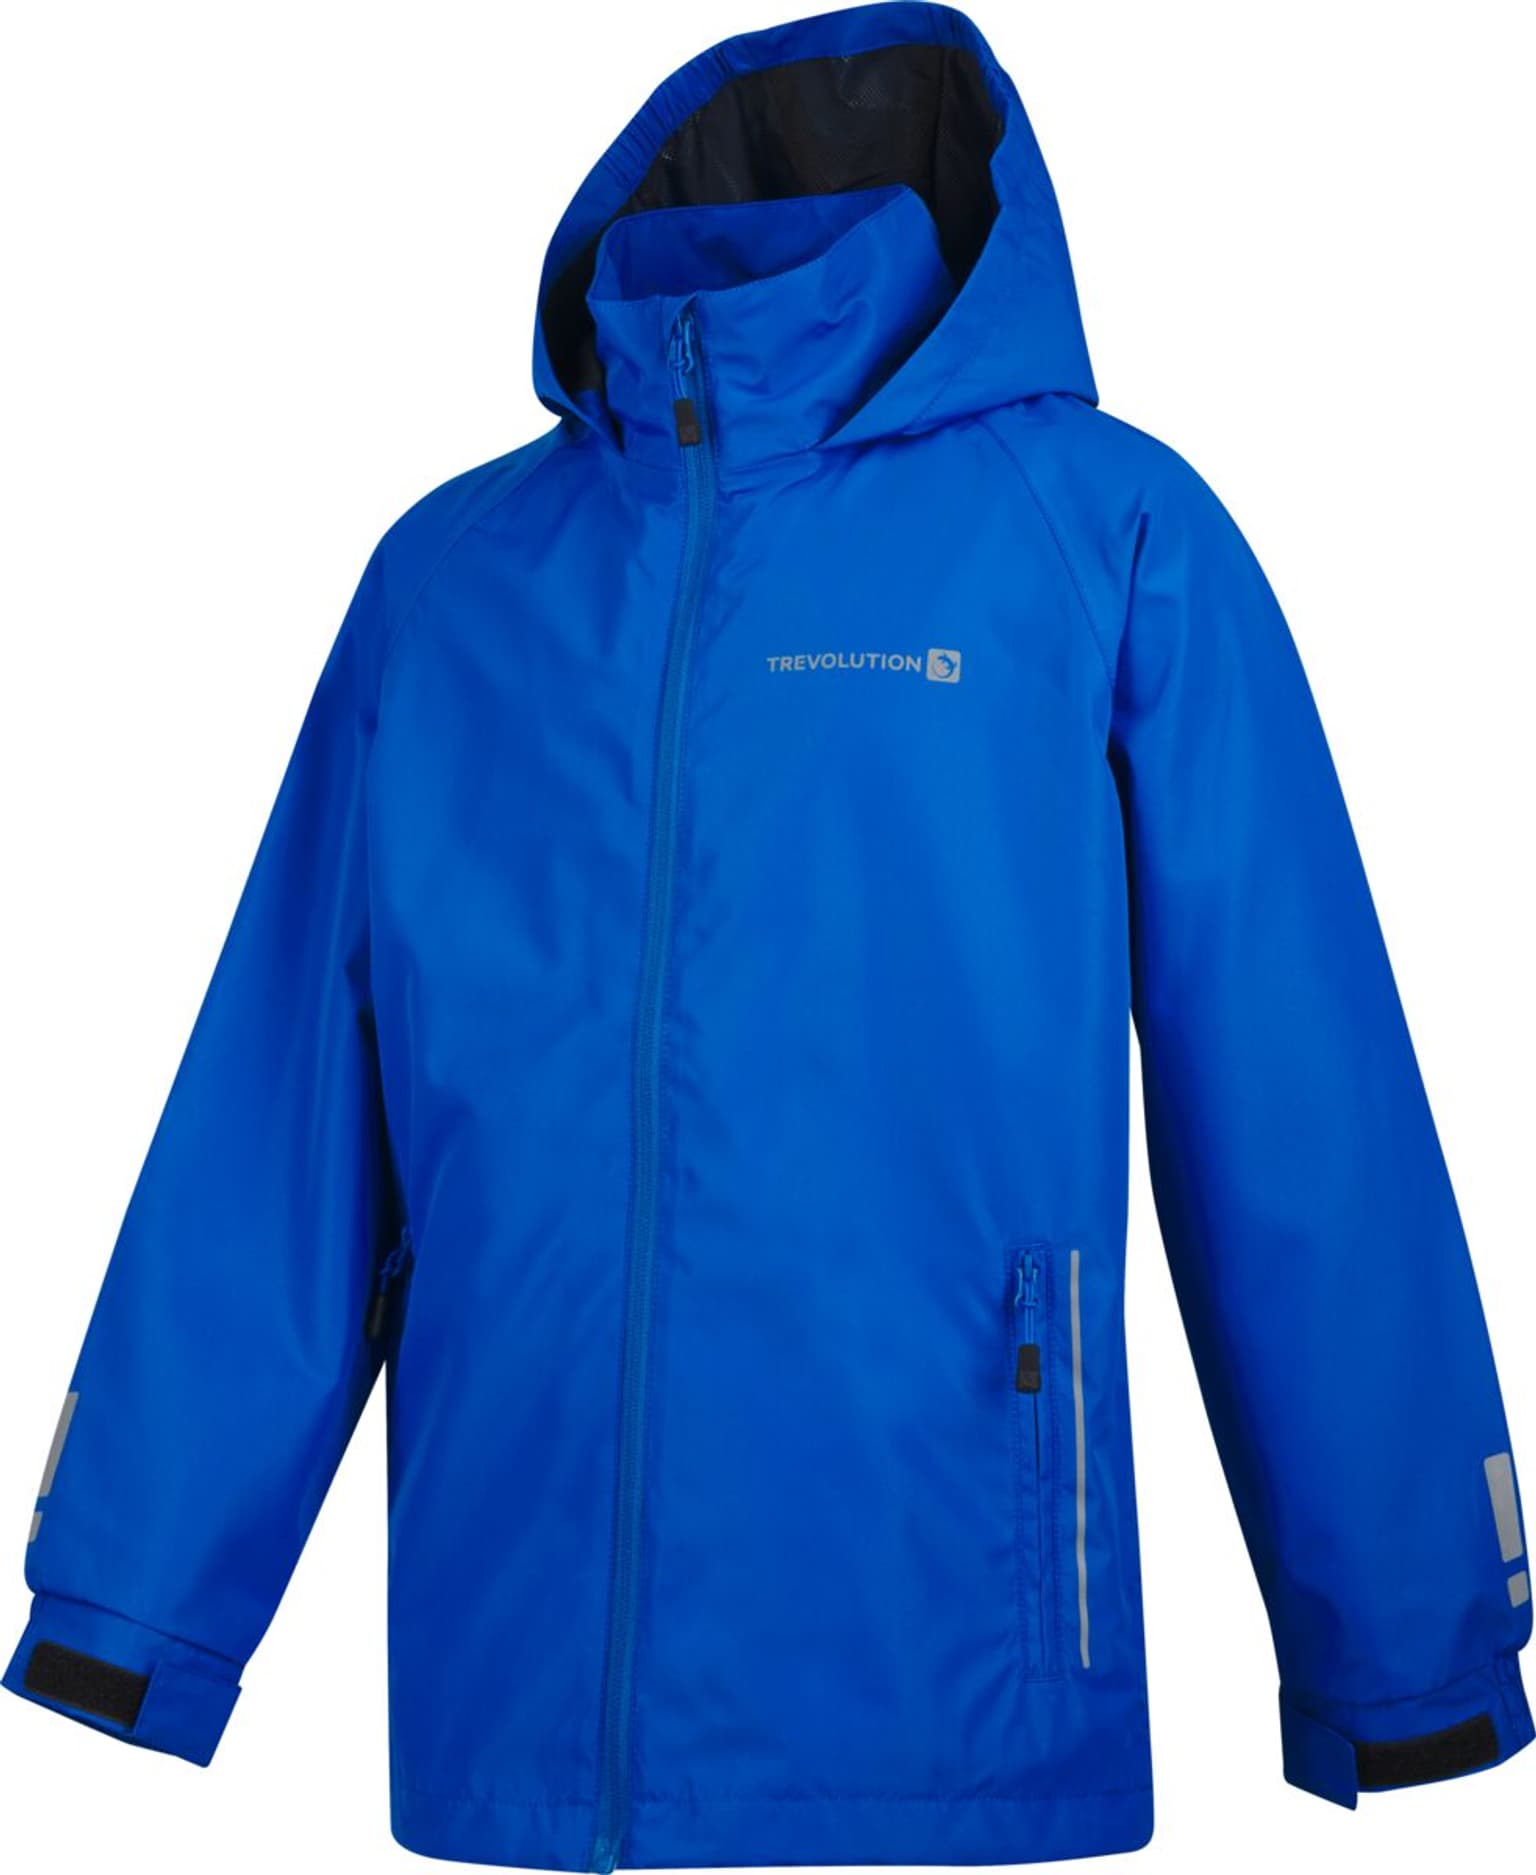 Trevolution Trevolution Regenjacke Regenjacke blu-reale 1